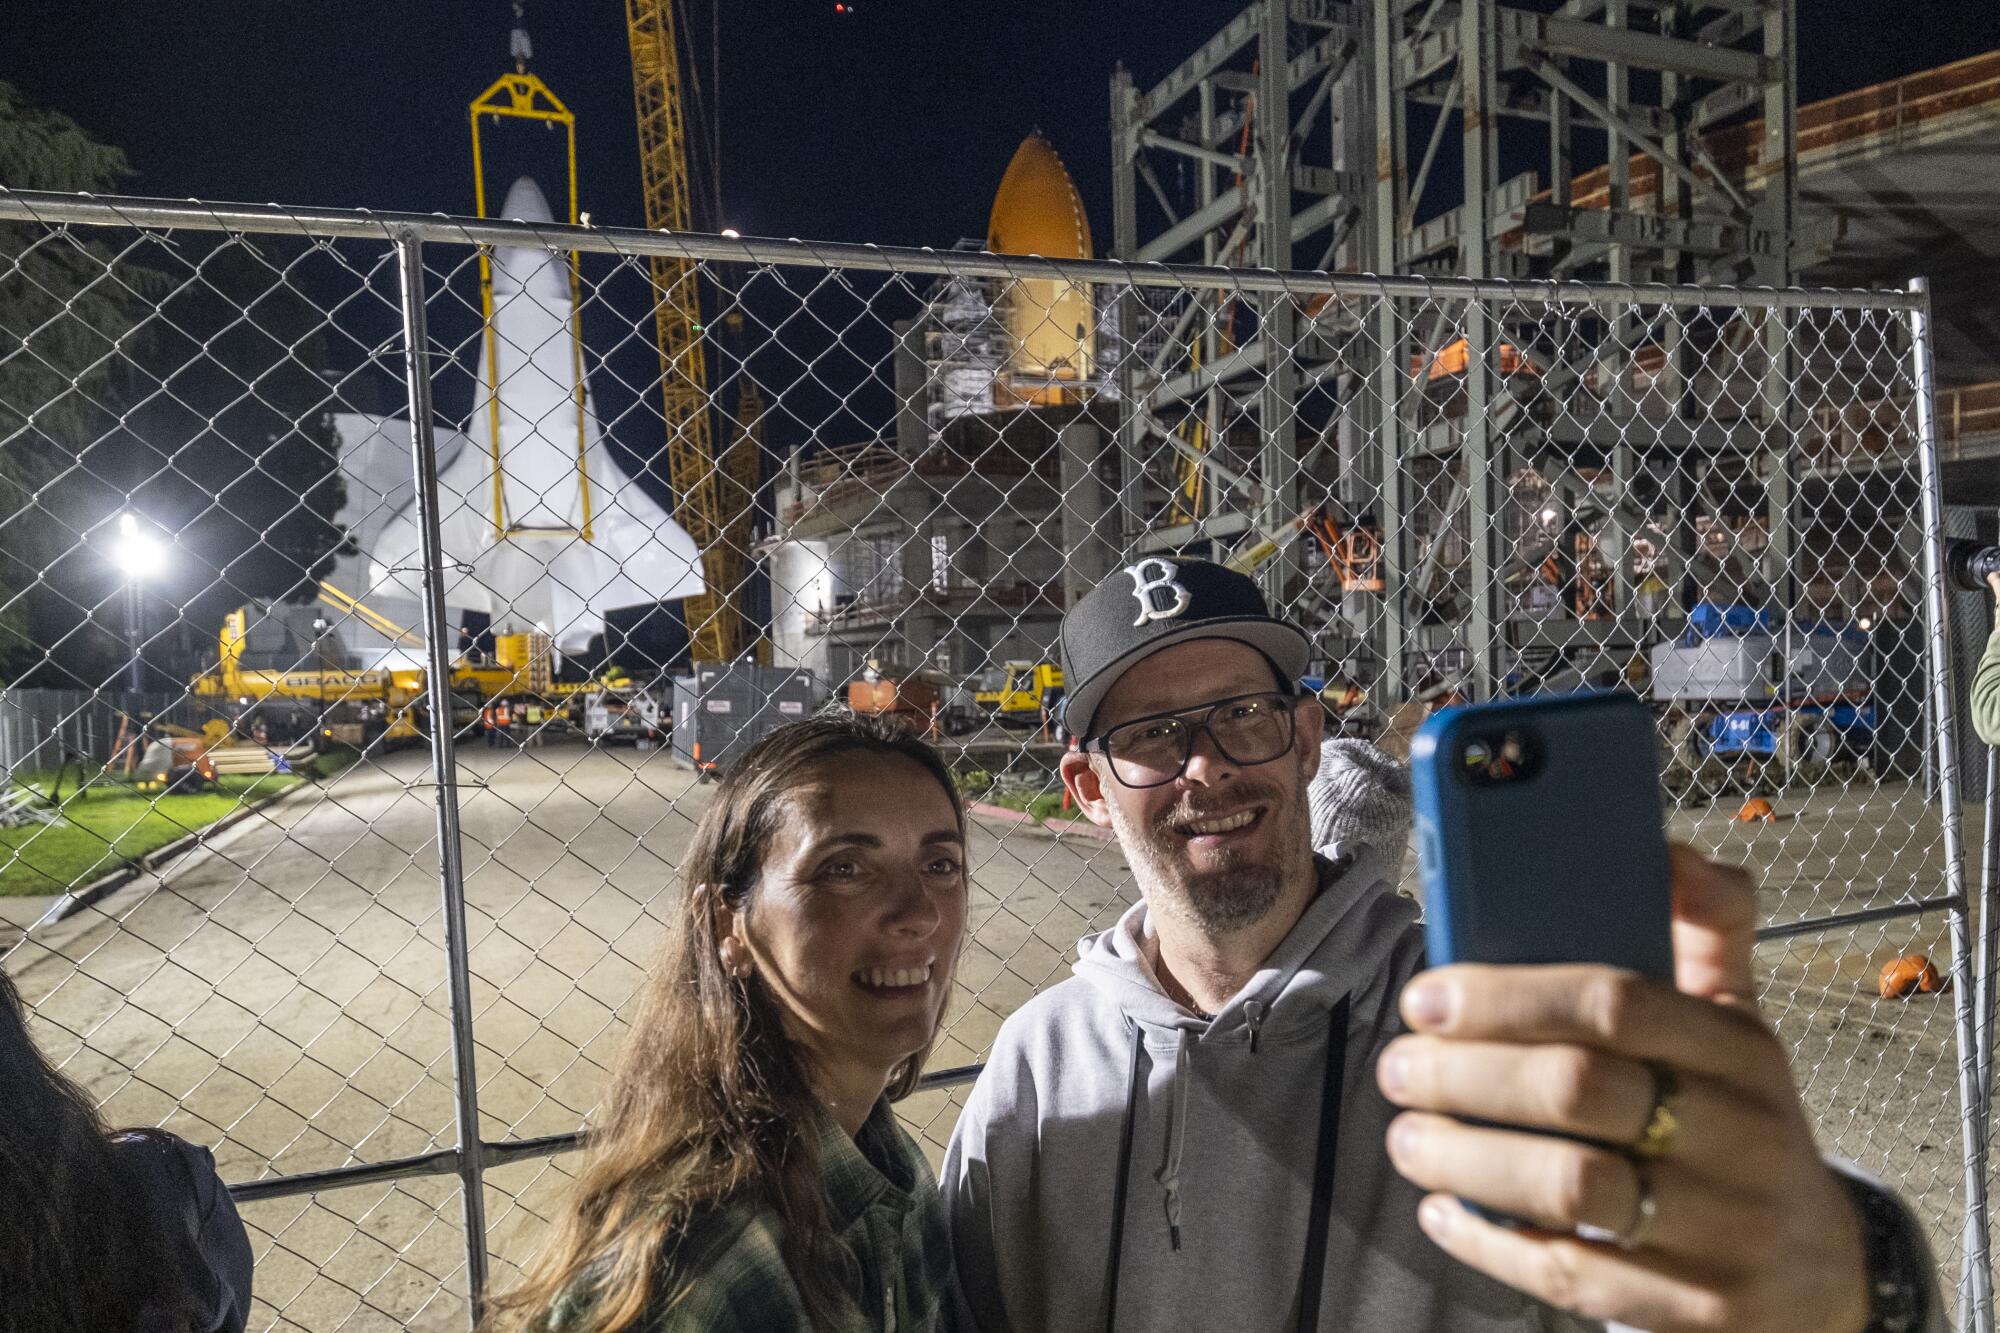 Piers Brinkley, right, and Clare David take photos in front of the space shuttle Endeavor.